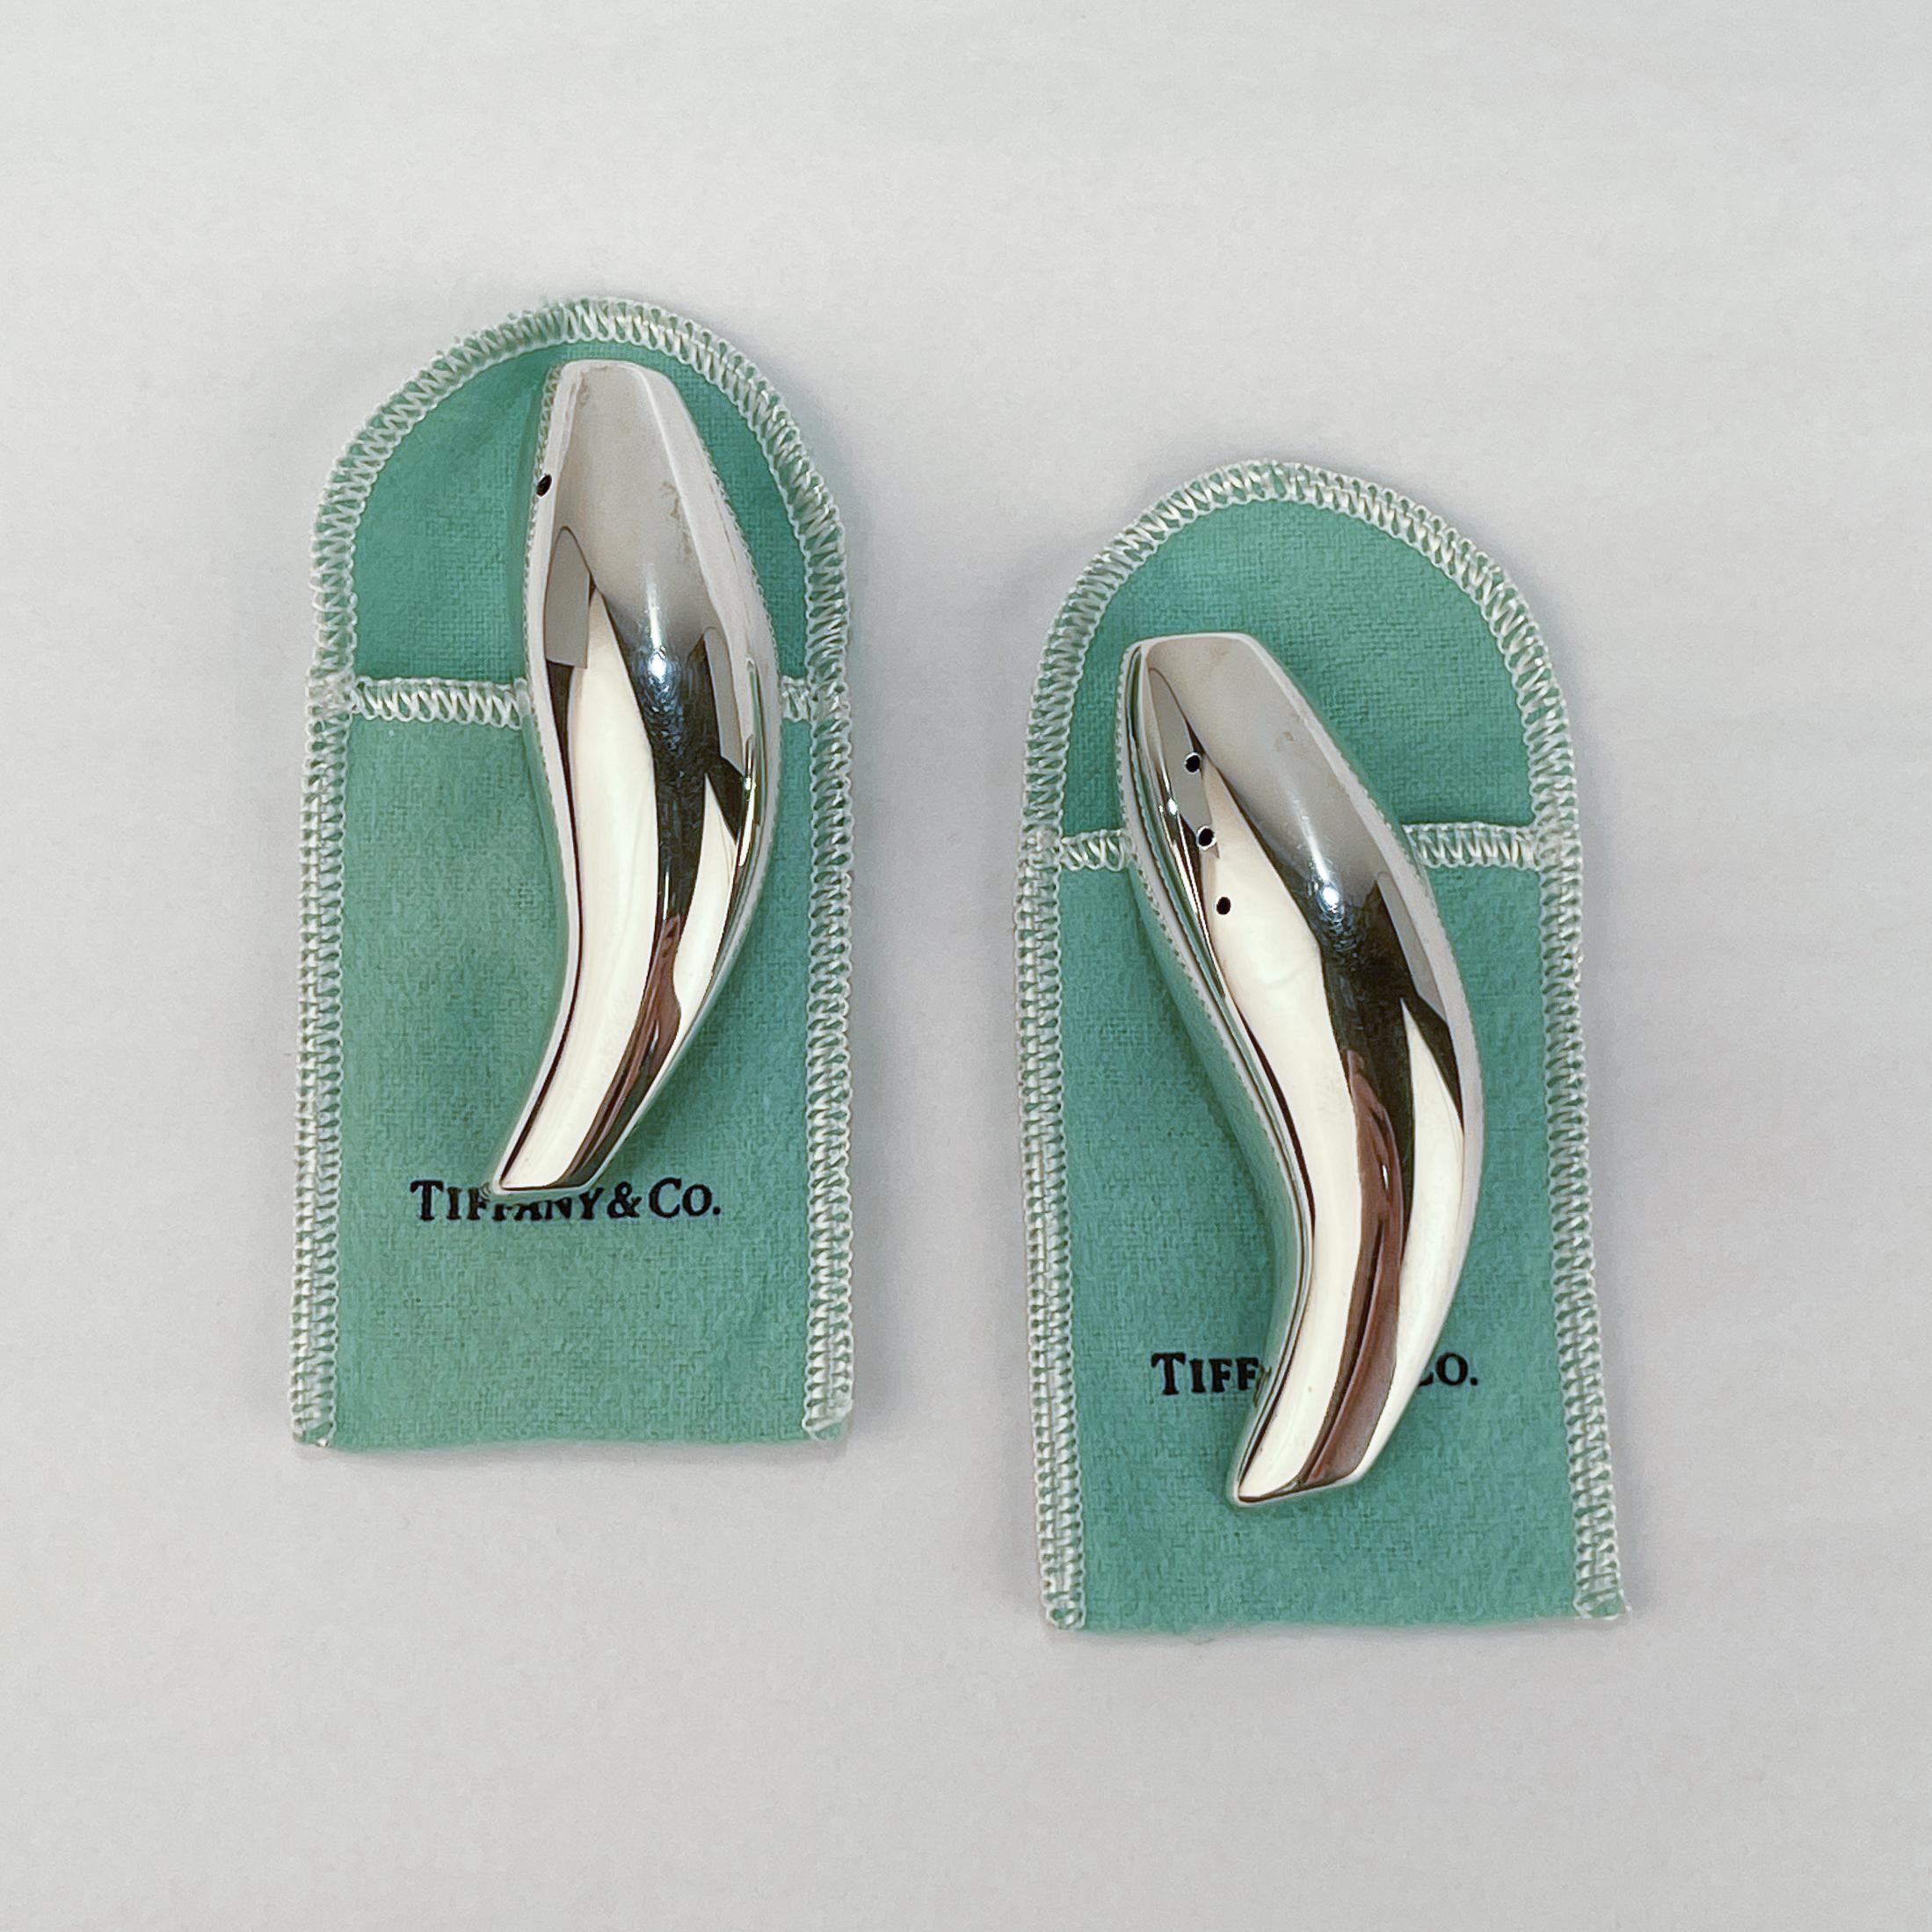 Tiffany & Co. Sterling Silver 'Fish' Salt & Pepper Shakers by Frank Gehry 4